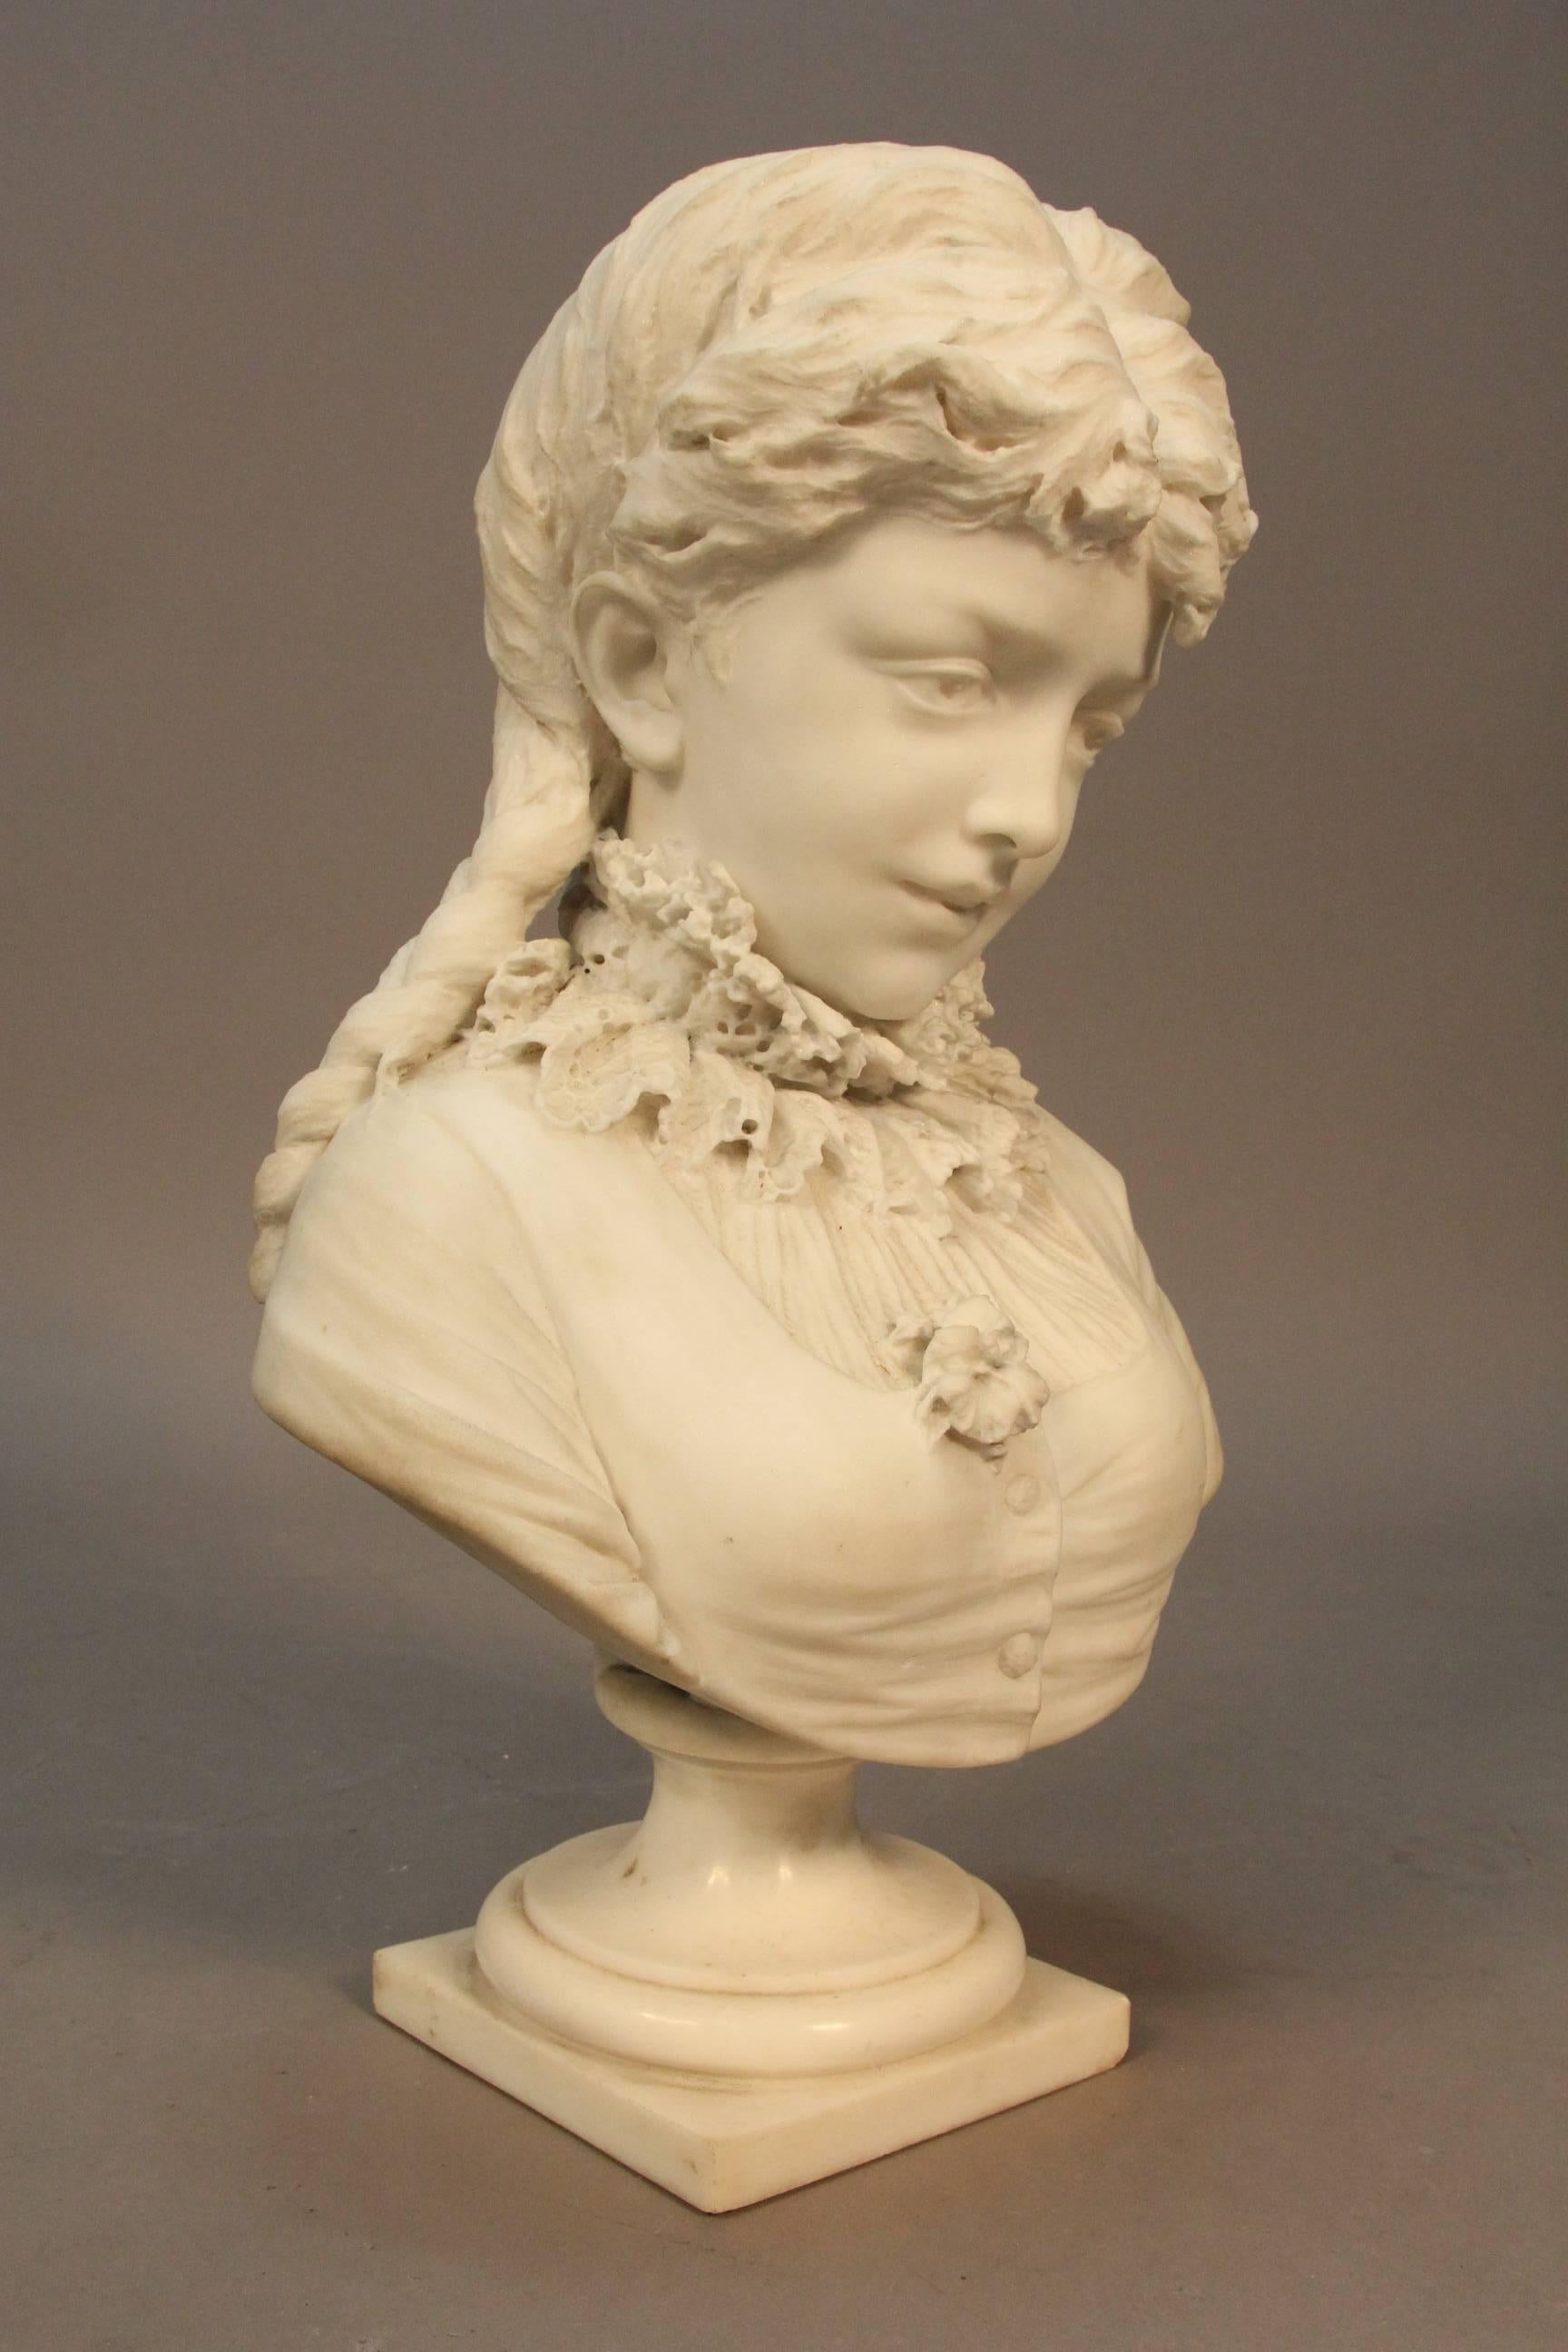 A very fine 19th century marble sculpture by Argenti. Having exceptionally fine details and execution and marble carving mastery. The little girl with braids in her hair and a soft sweet life like expression. Artist signed, 1880s.